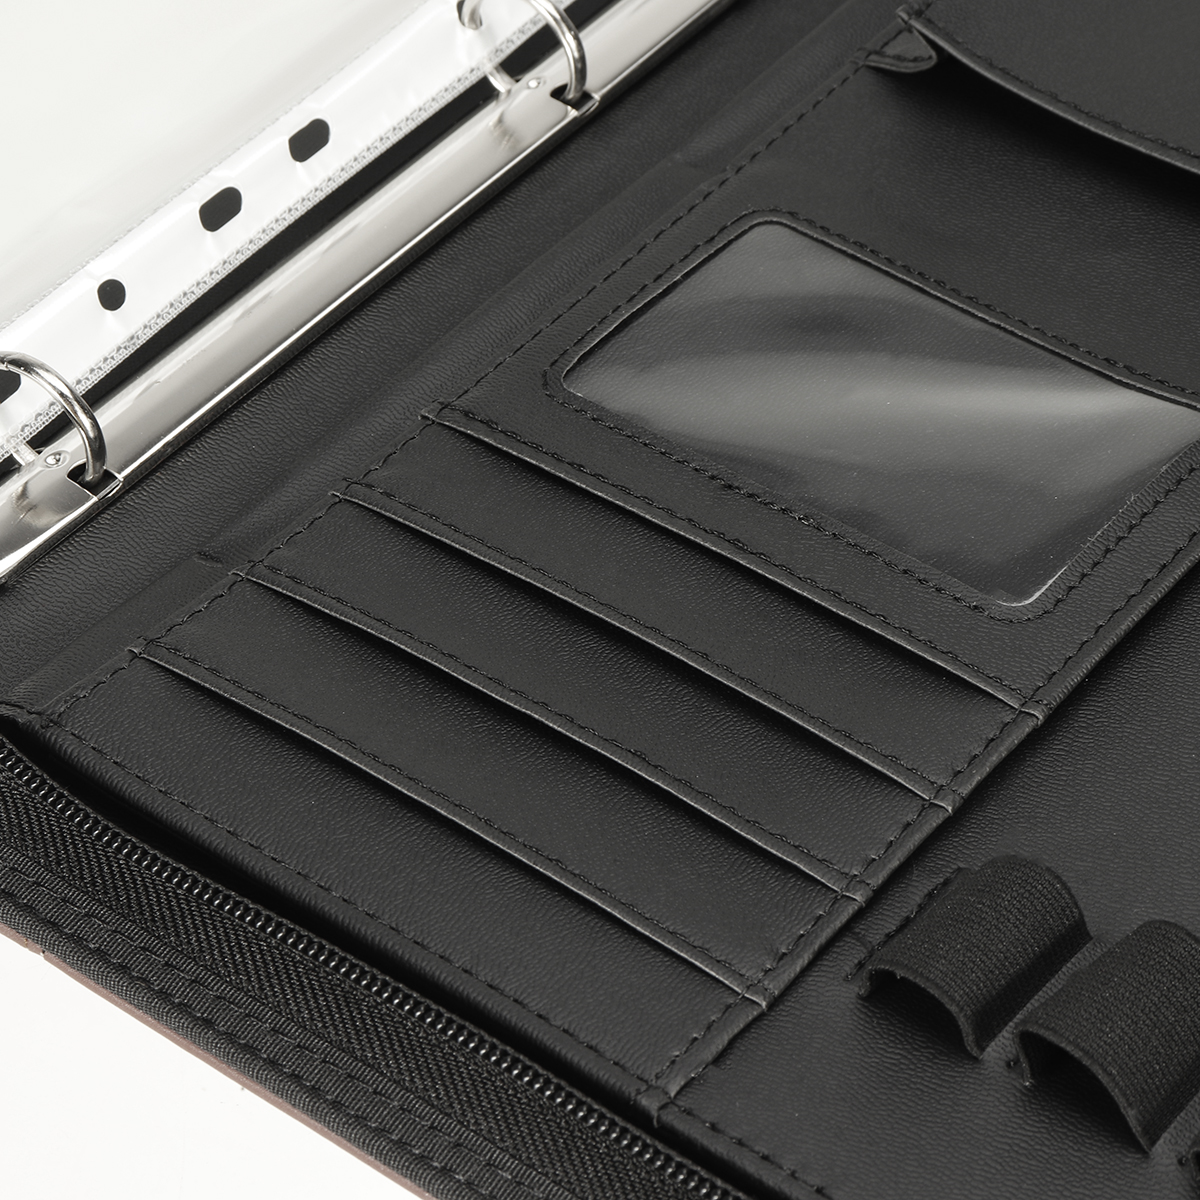 Find ATailorBird PF03 A4 PU Leather Office Document Folder Business Portable Multifunctional with Pen Slot Mobile Phone Storage Pack Pads Manager Portfolio Office Supplies for Sale on Gipsybee.com with cryptocurrencies